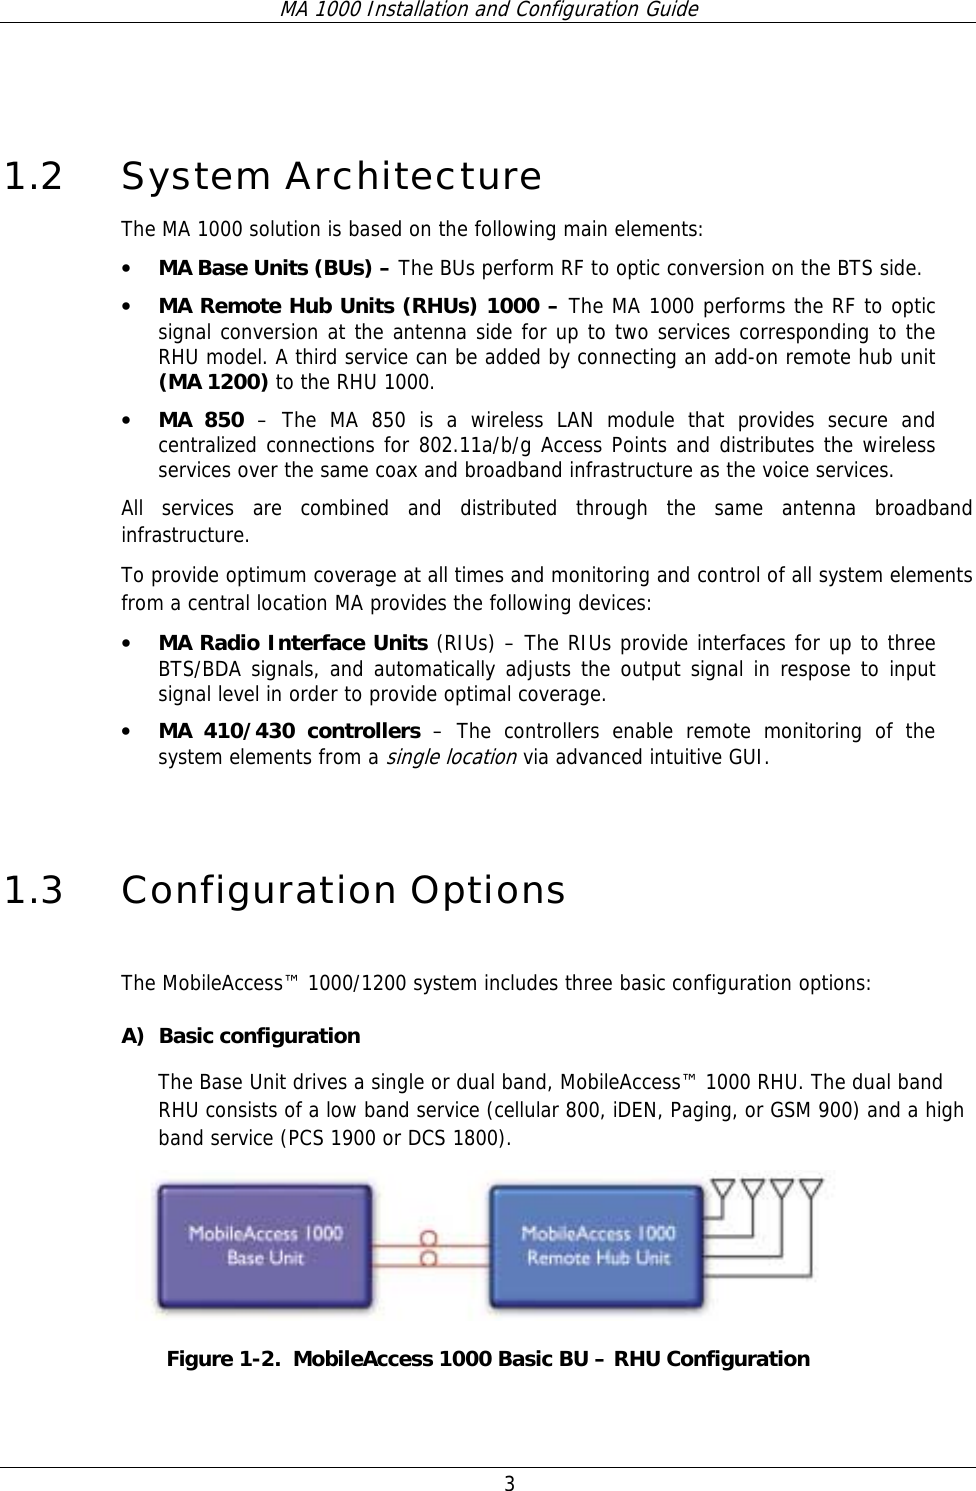 MA 1000 Installation and Configuration Guide  3  1.2 System Architecture The MA 1000 solution is based on the following main elements:    • MA Base Units (BUs) – The BUs perform RF to optic conversion on the BTS side.   • MA Remote Hub Units (RHUs) 1000 – The MA 1000 performs the RF to optic signal conversion at the antenna side for up to two services corresponding to the RHU model. A third service can be added by connecting an add-on remote hub unit (MA 1200) to the RHU 1000.  • MA 850 – The MA 850 is a wireless LAN module that provides secure and centralized connections for 802.11a/b/g Access Points and distributes the wireless services over the same coax and broadband infrastructure as the voice services.   All services are combined and distributed through the same antenna broadband infrastructure.  To provide optimum coverage at all times and monitoring and control of all system elements from a central location MA provides the following devices: • MA Radio Interface Units (RIUs) – The RIUs provide interfaces for up to three BTS/BDA signals, and automatically adjusts the output signal in respose to input signal level in order to provide optimal coverage.   • MA 410/430 controllers – The controllers enable remote monitoring of the system elements from a single location via advanced intuitive GUI.  1.3 Configuration Options  The MobileAccess™ 1000/1200 system includes three basic configuration options: A) Basic configuration The Base Unit drives a single or dual band, MobileAccess™ 1000 RHU. The dual band RHU consists of a low band service (cellular 800, iDEN, Paging, or GSM 900) and a high band service (PCS 1900 or DCS 1800).  Figure  1-2.  MobileAccess 1000 Basic BU – RHU Configuration 